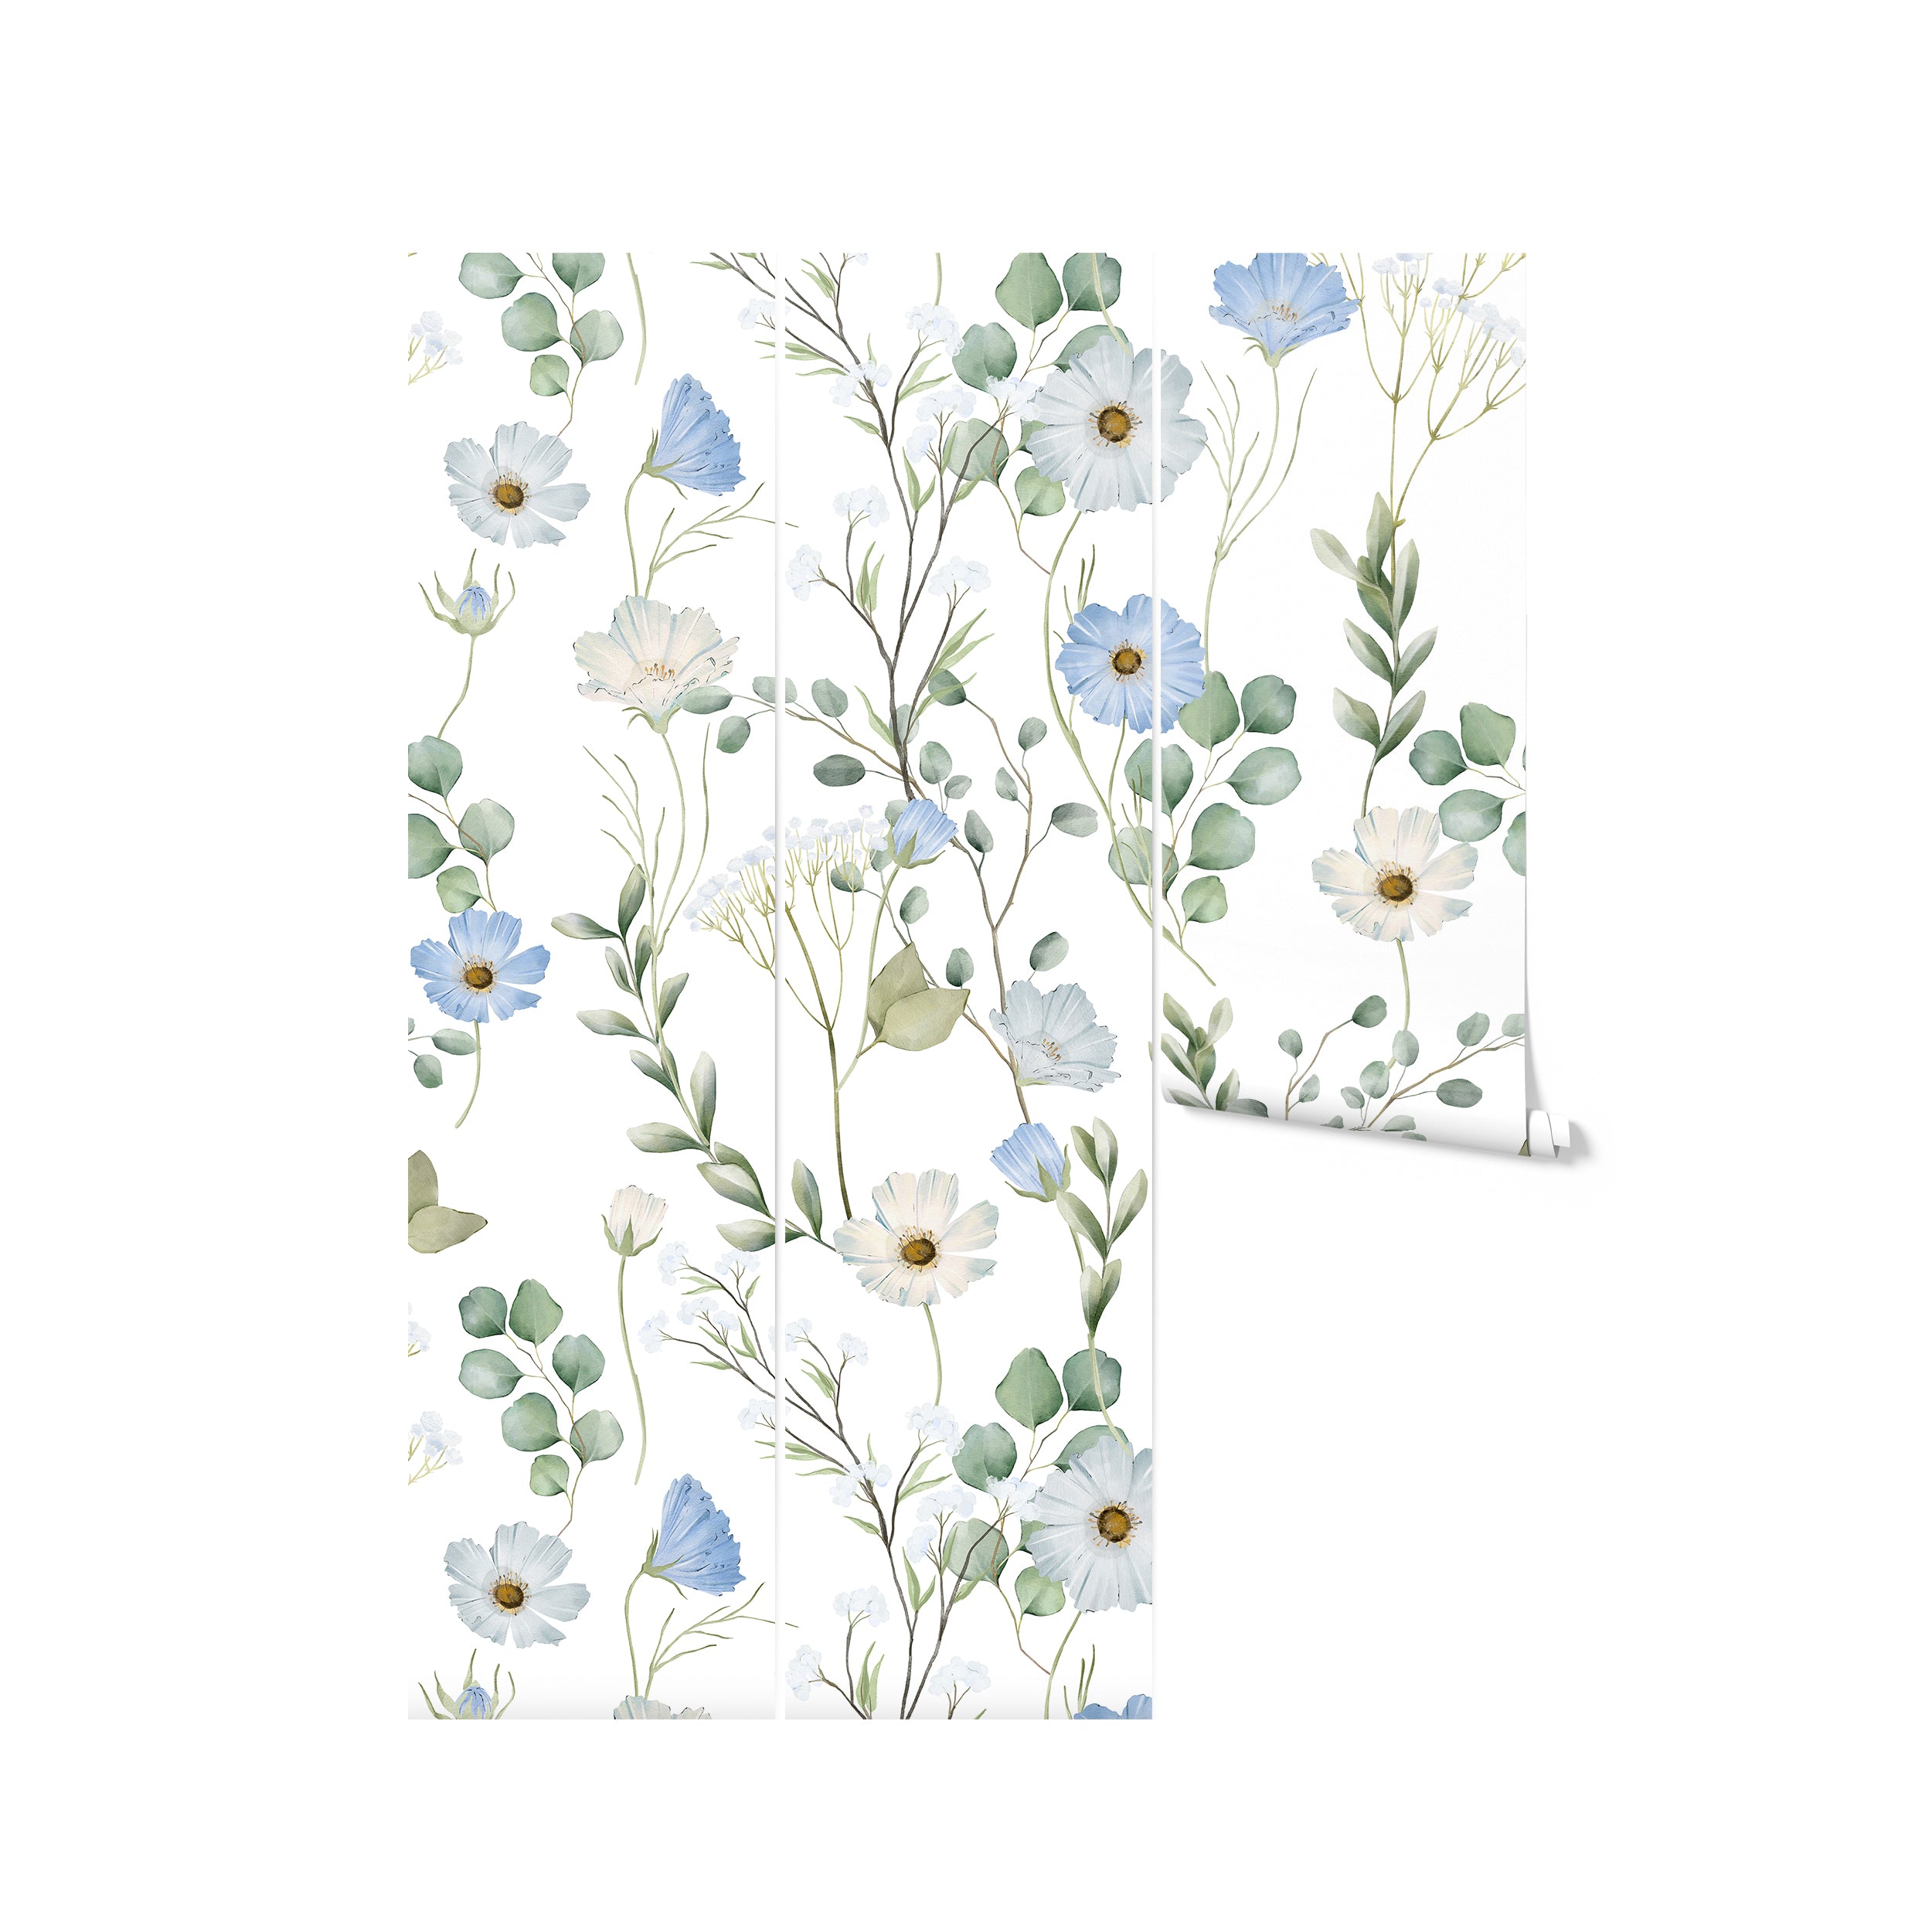 Vintage Green Floral Wallpaper Spring Meadow Flowers Floral Peel and Stick  Wallpaper Vinyl Self Adhesive Contact Paper Decorative for Bedroom Walls